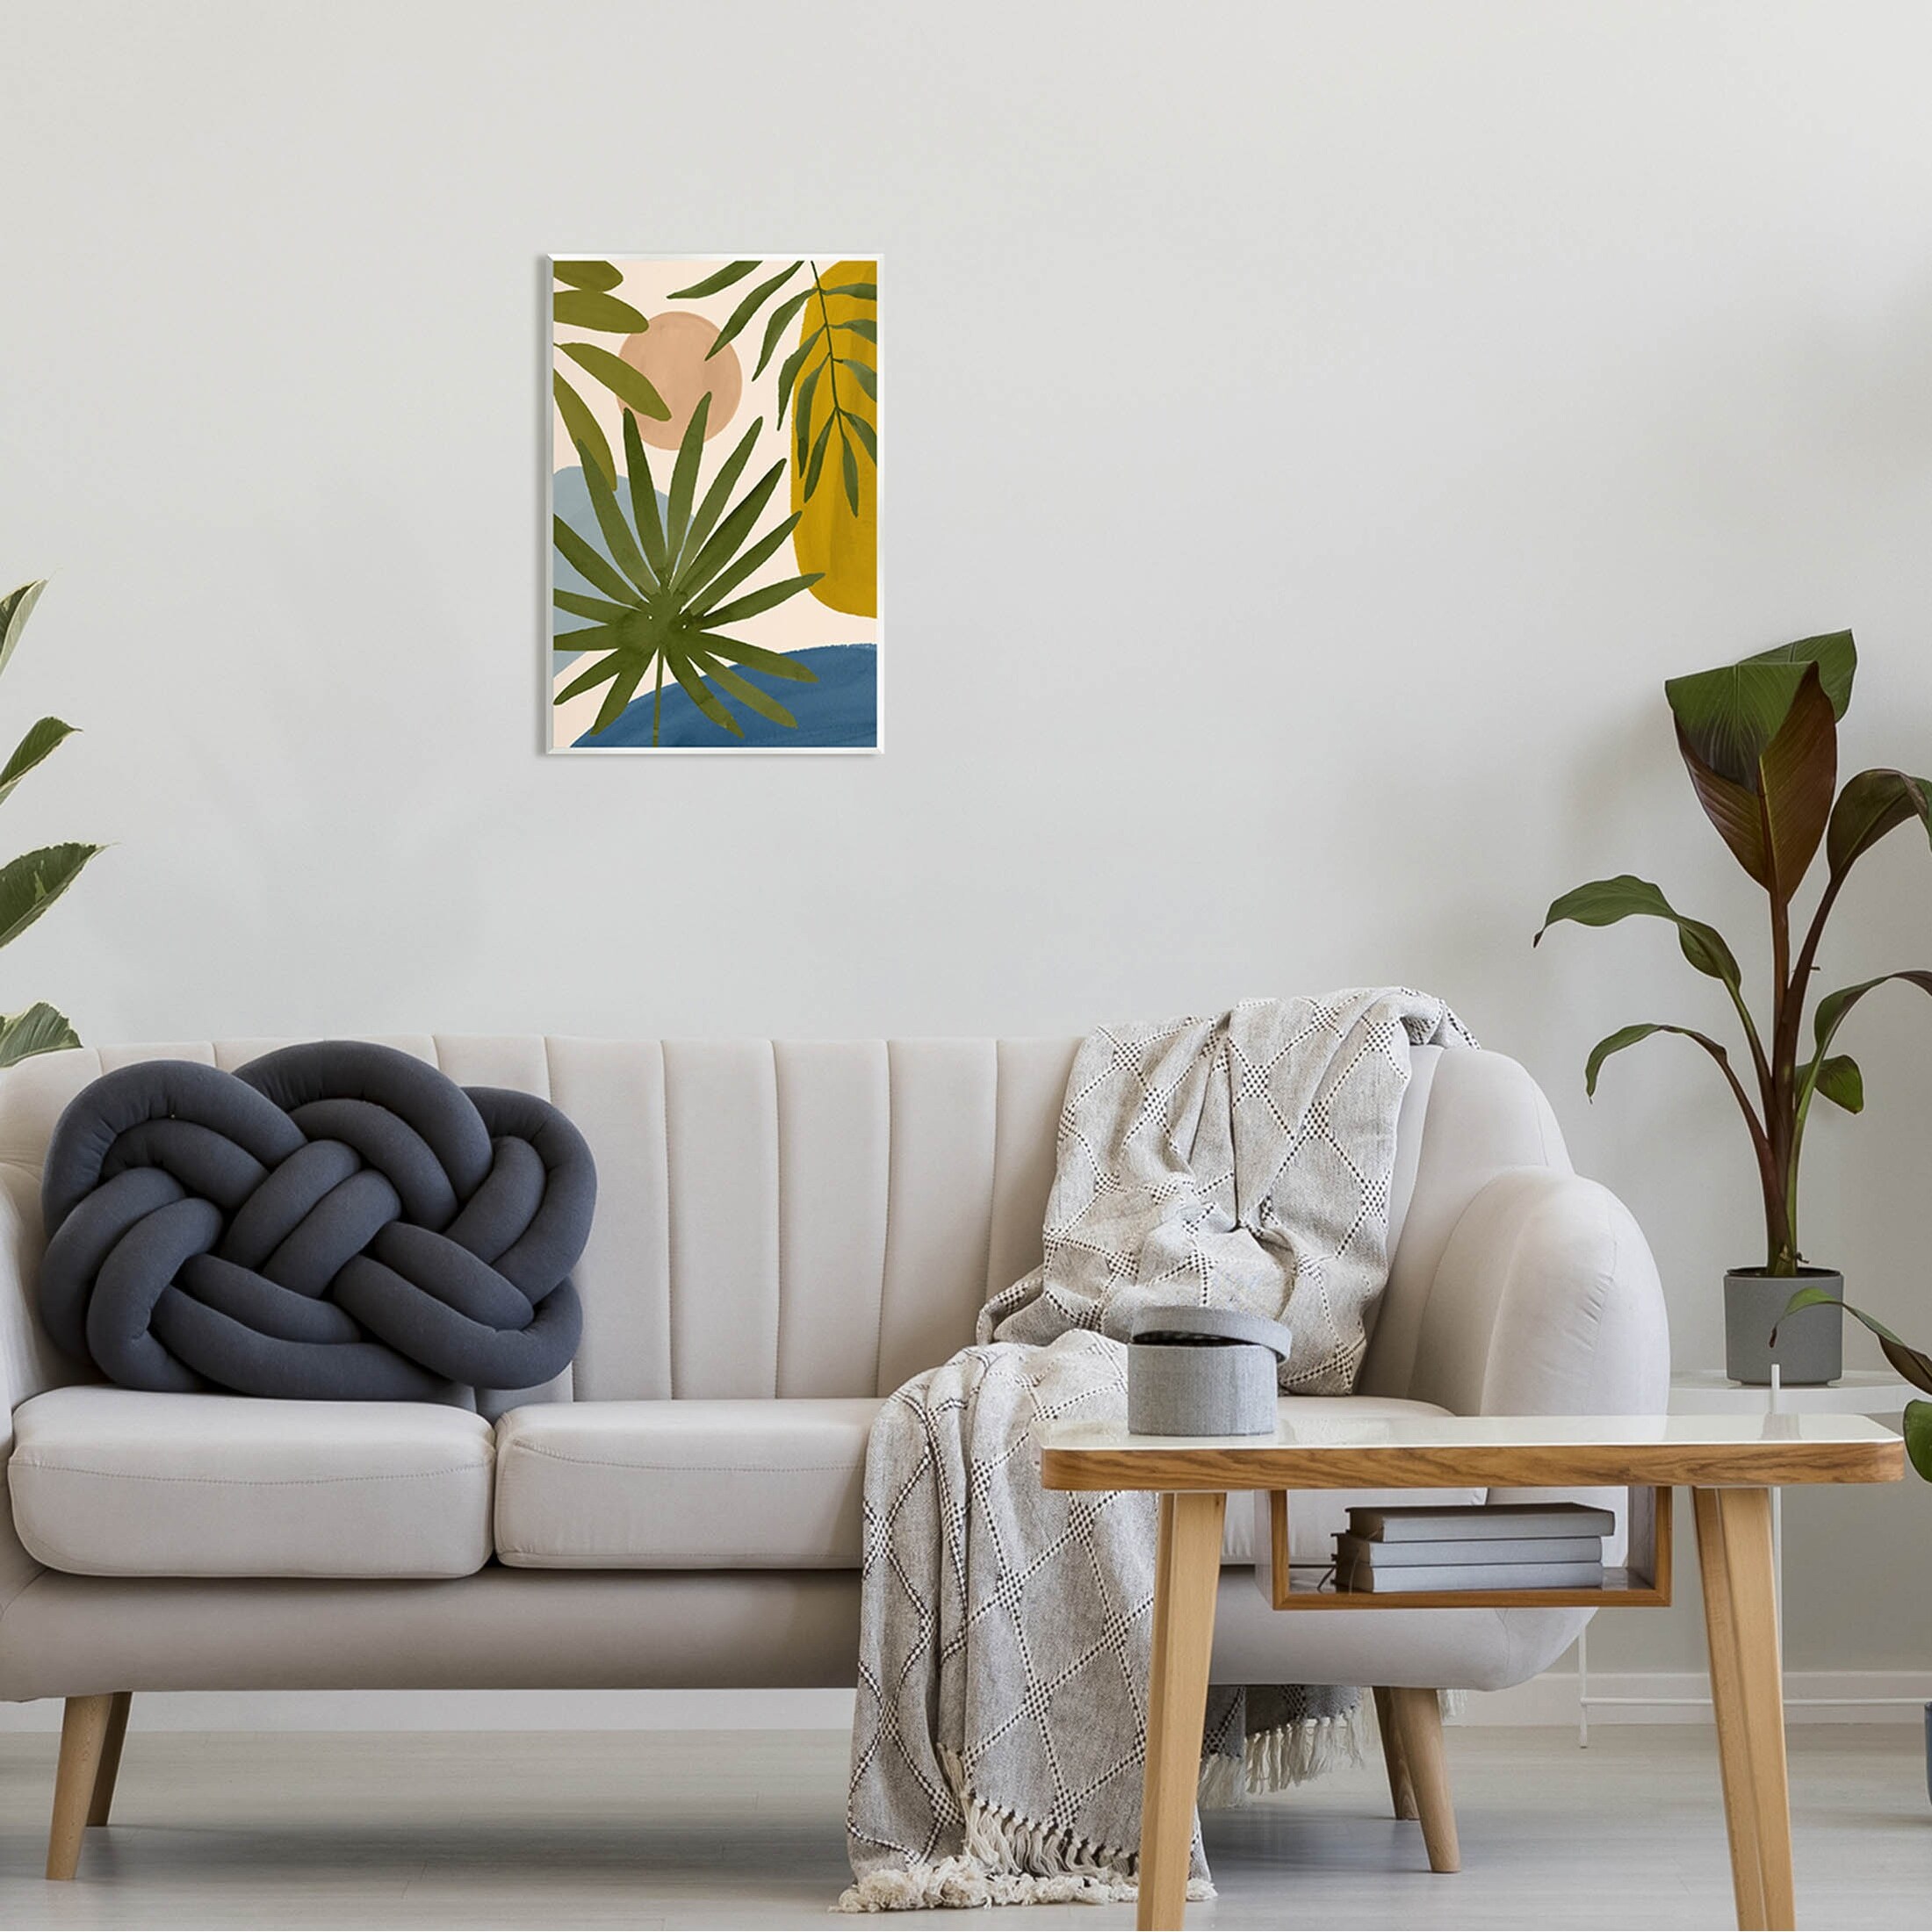 Stupell Various Palm Leaves Geometric Wall Plaque Art, Design by Victoria Barnes